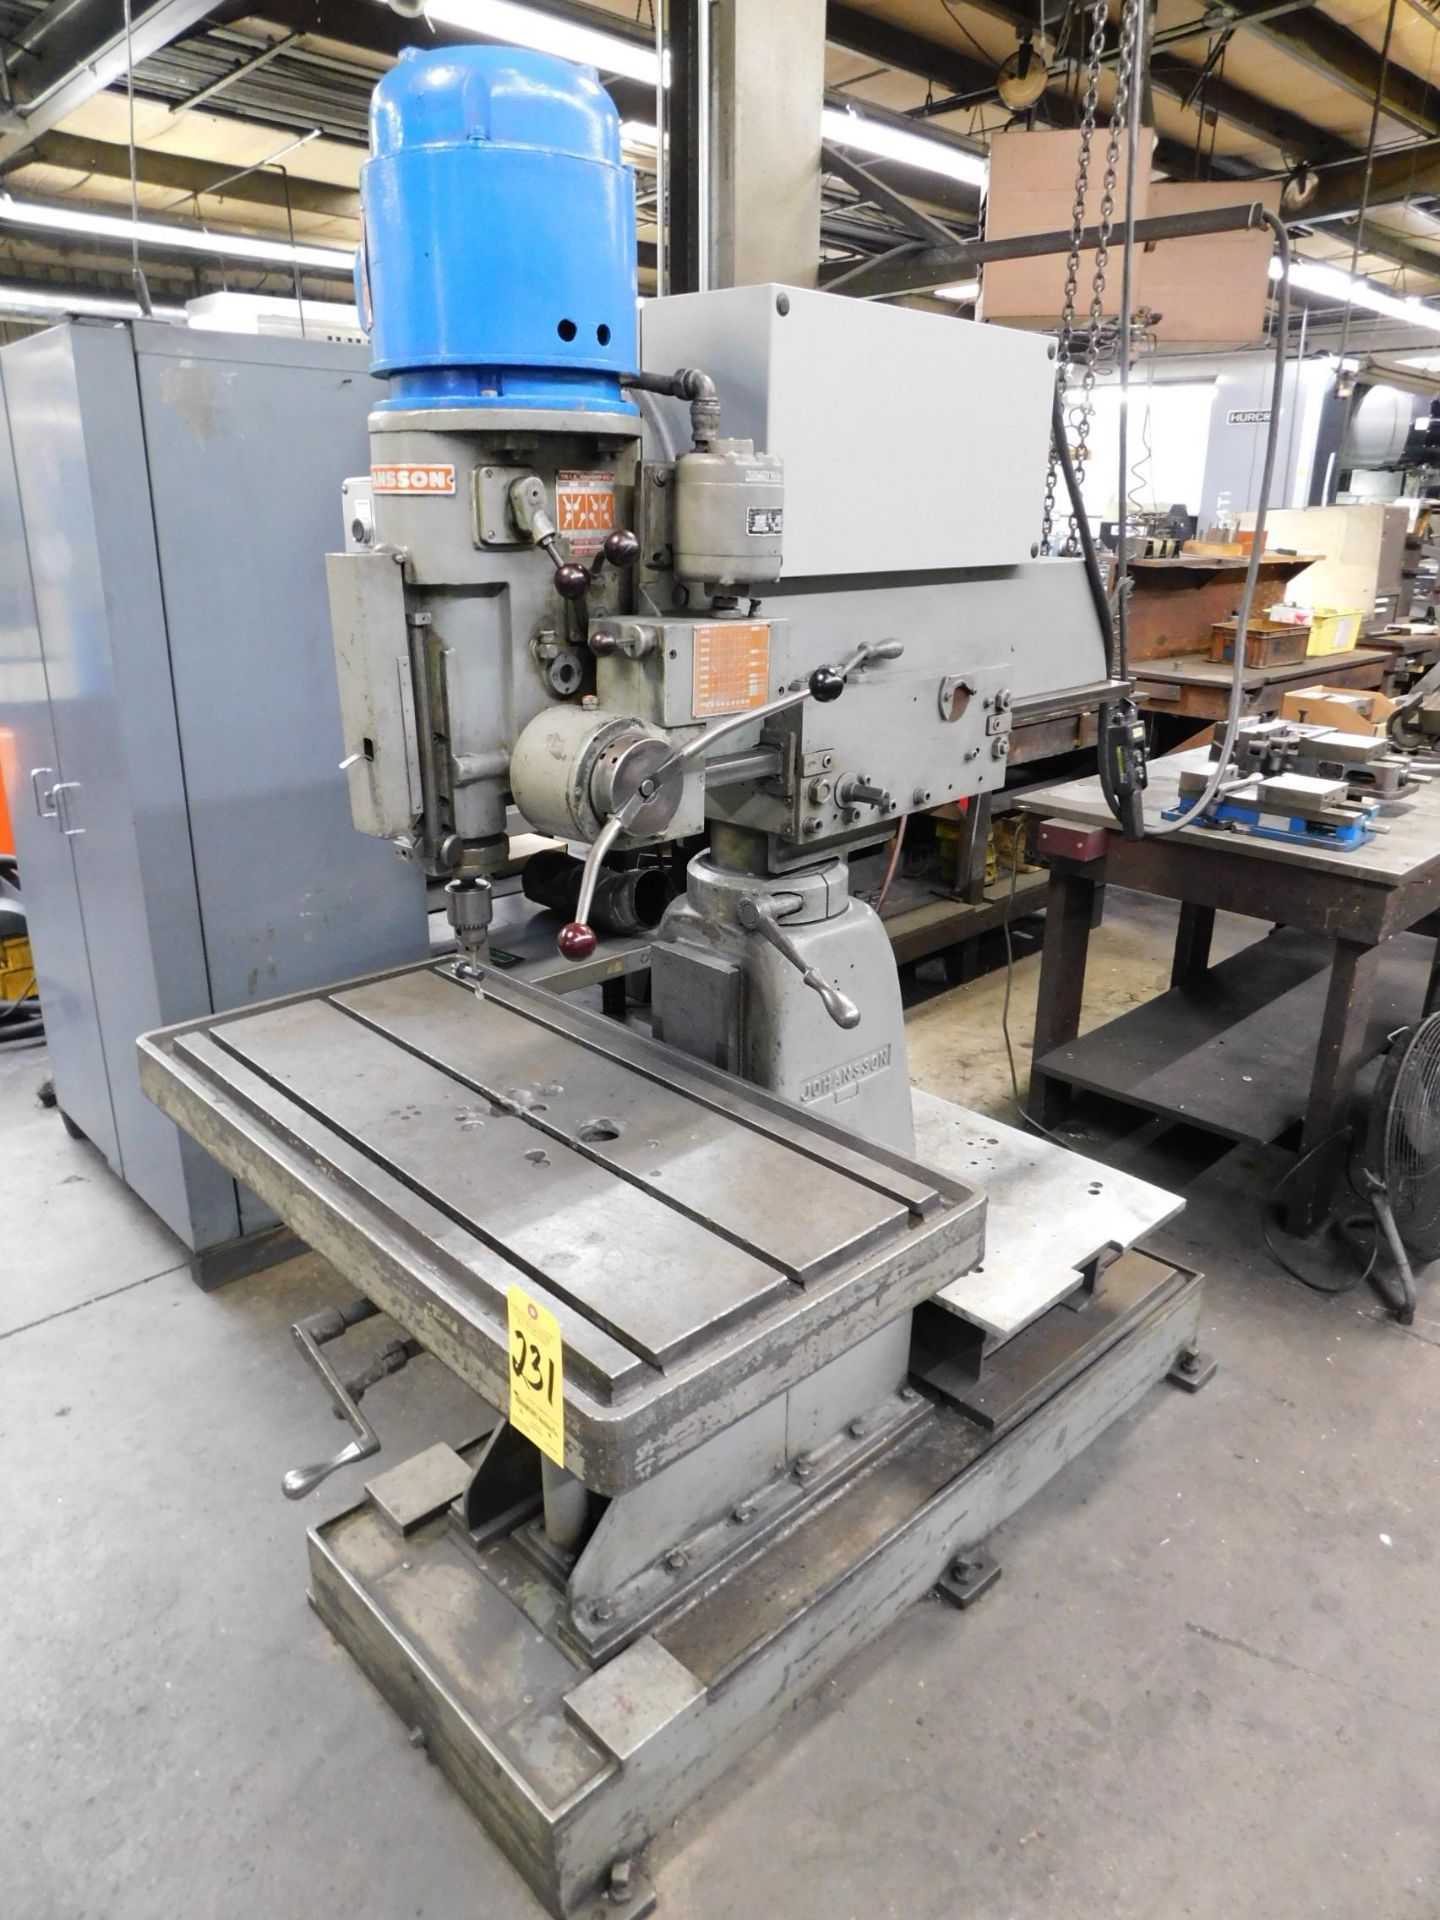 Johansson Radial Drill, s/n 32320, Quill Powerfeed, 20" X 40" T-Slotted Production Table